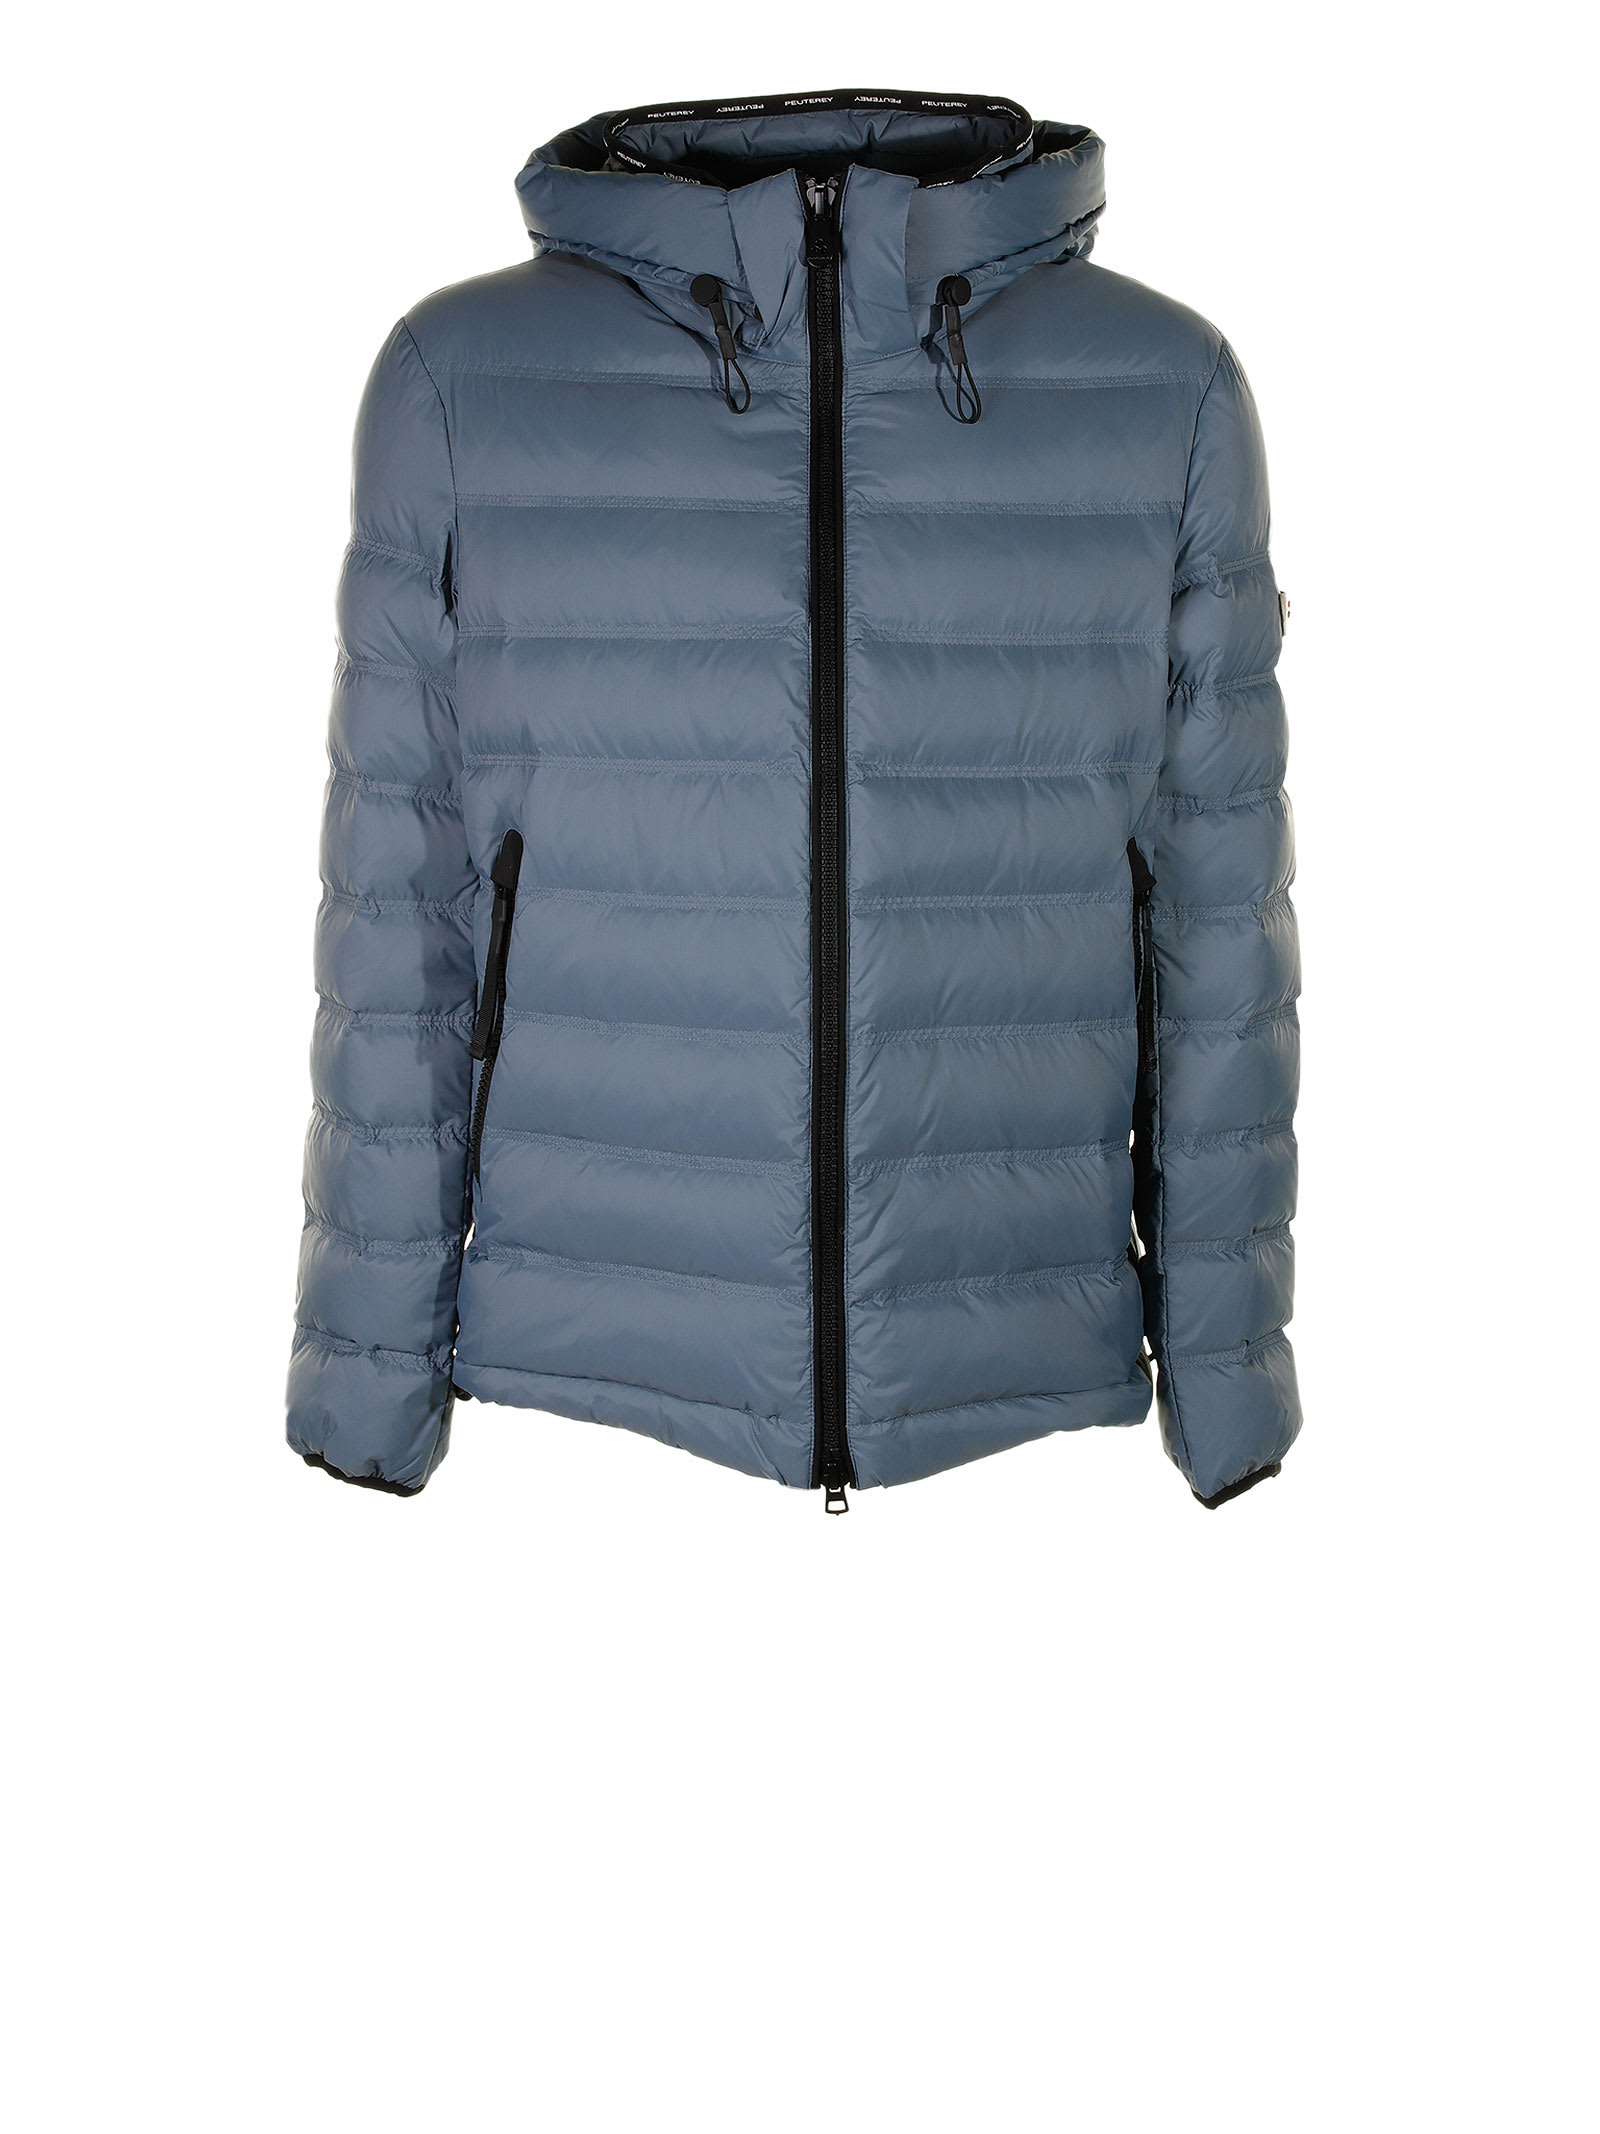 PEUTEREY QUILTED DOWN JACKET WITH HOOD